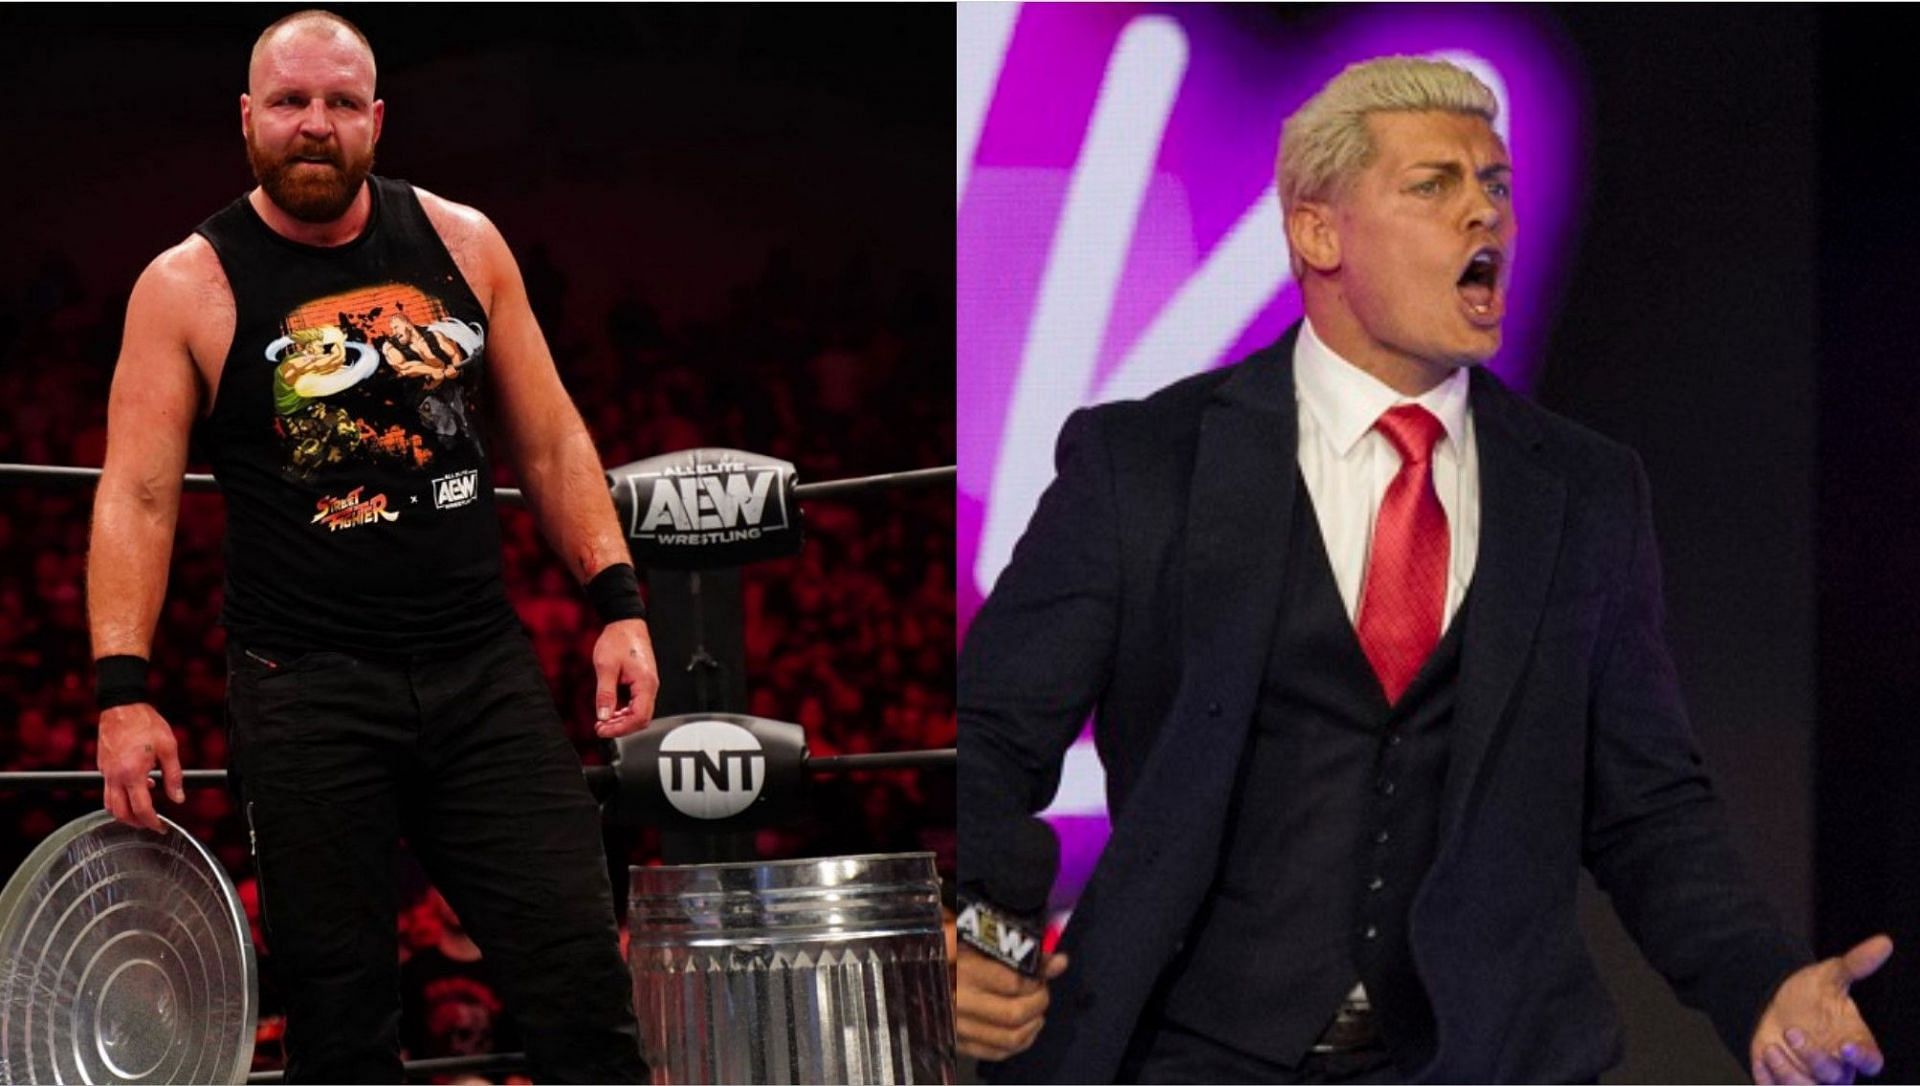 Jon Moxley (left) and Cody Rhodes (right)